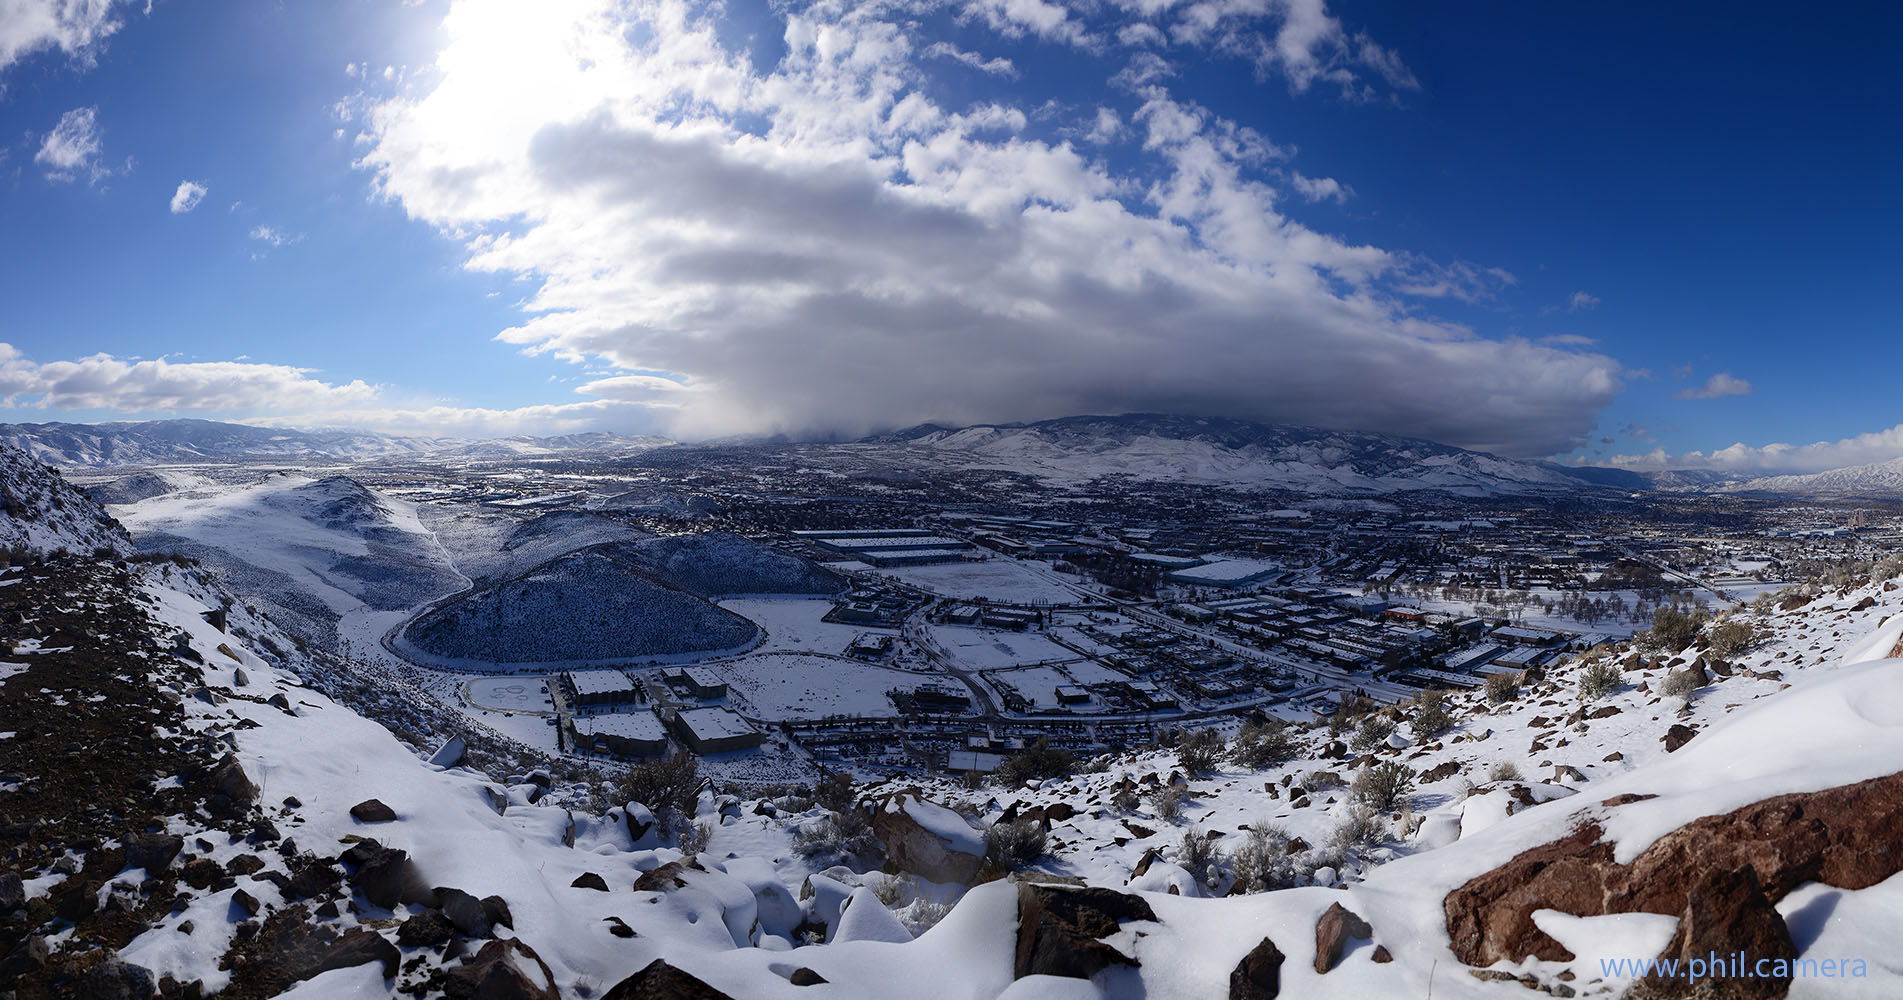 Reno, NV blanketed in a fresh layer